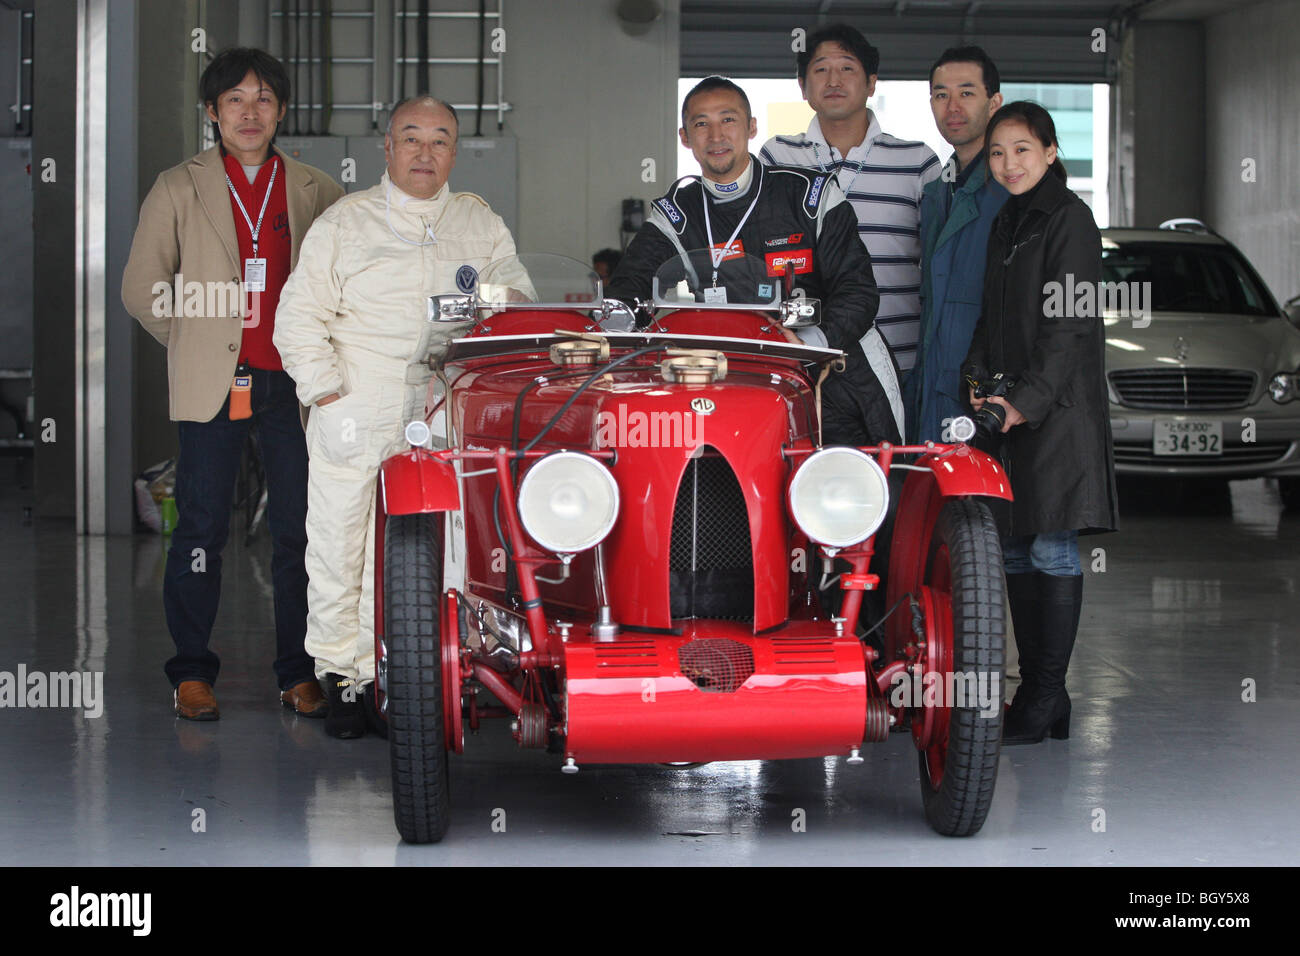 1933 MG Type-C Midget, owned and driven by Koichi Sugita (2nd from left). Le Mans Classic car race, Fuji Speedway, Japan 2007 Stock Photo